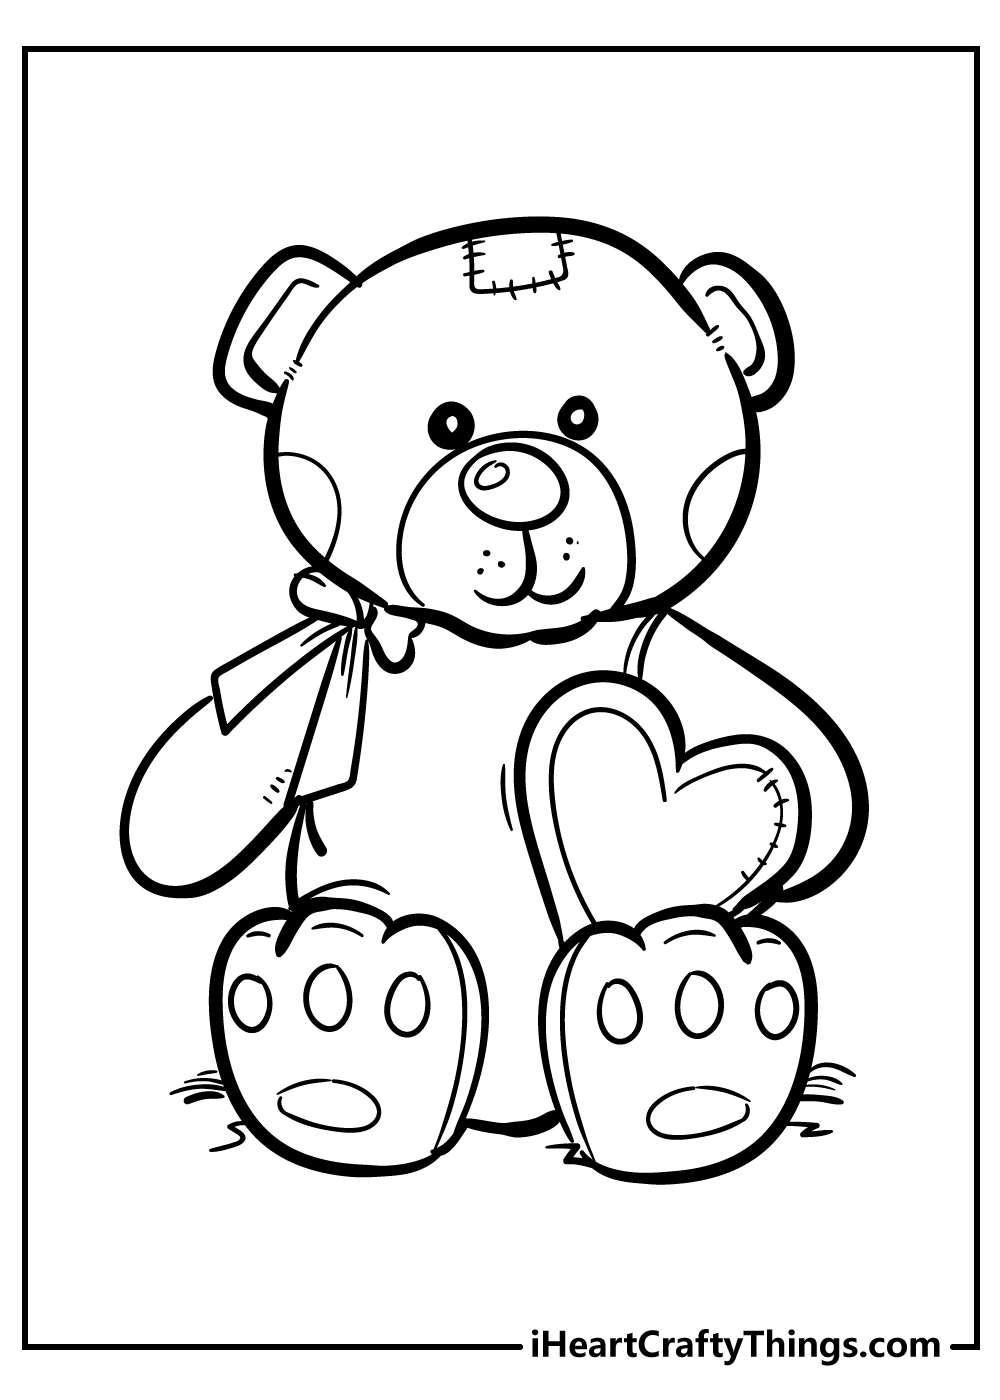 Printable Teddy Bear Coloring Pages Updated 20